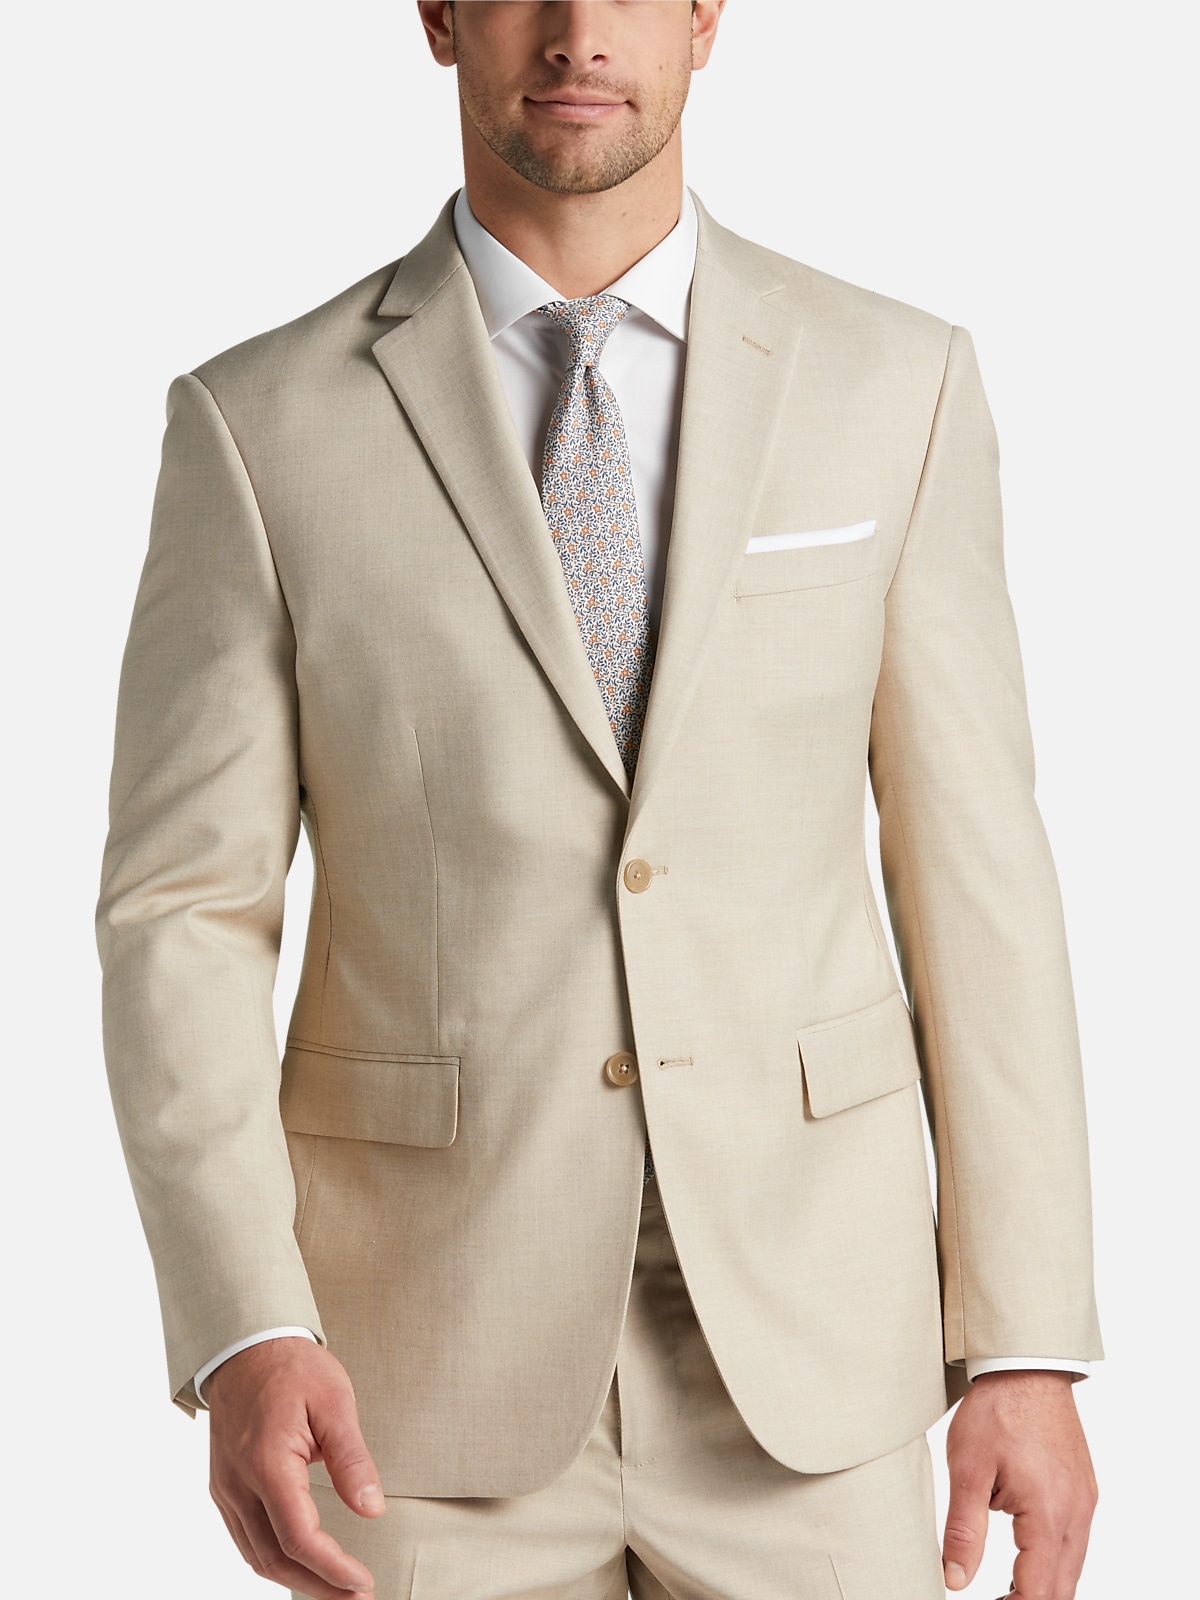 https://image.menswearhouse.com/is/image/TMW/TMW_3XPF_05_PRONTO_UOMO_SUIT_SEPARATE_JACKETS_TAN_SHARKSKIN_MAIN?imPolicy=pdp-zoom-mob